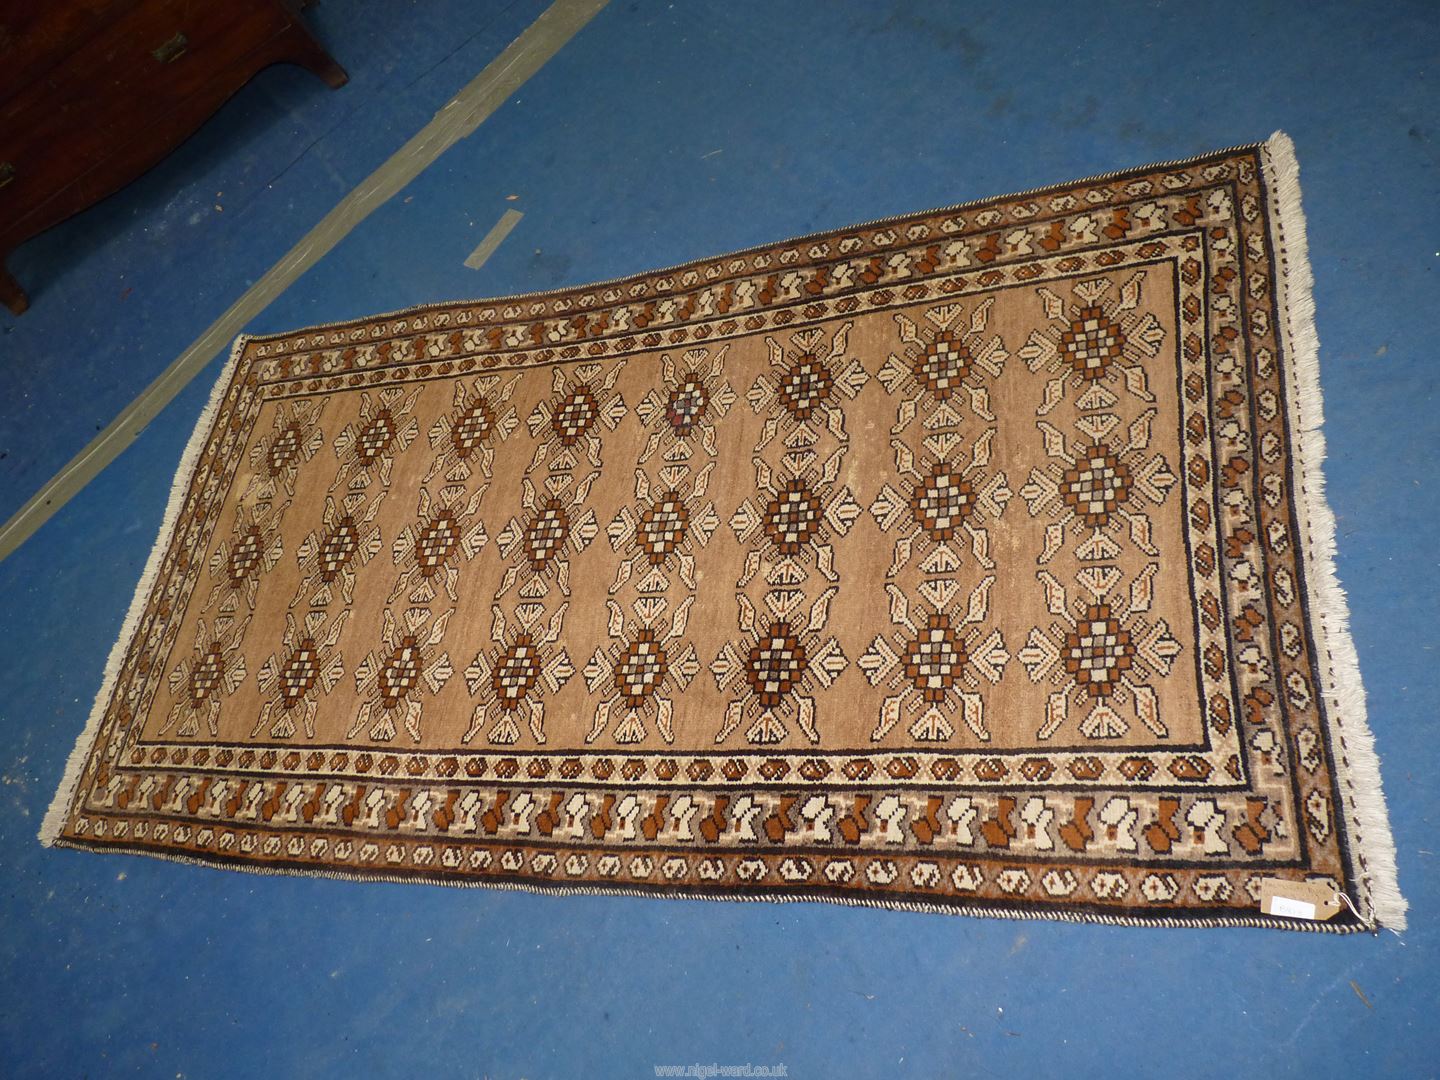 A handmade Balouch rug in browns and creams, 6' 4" x 3' 4".